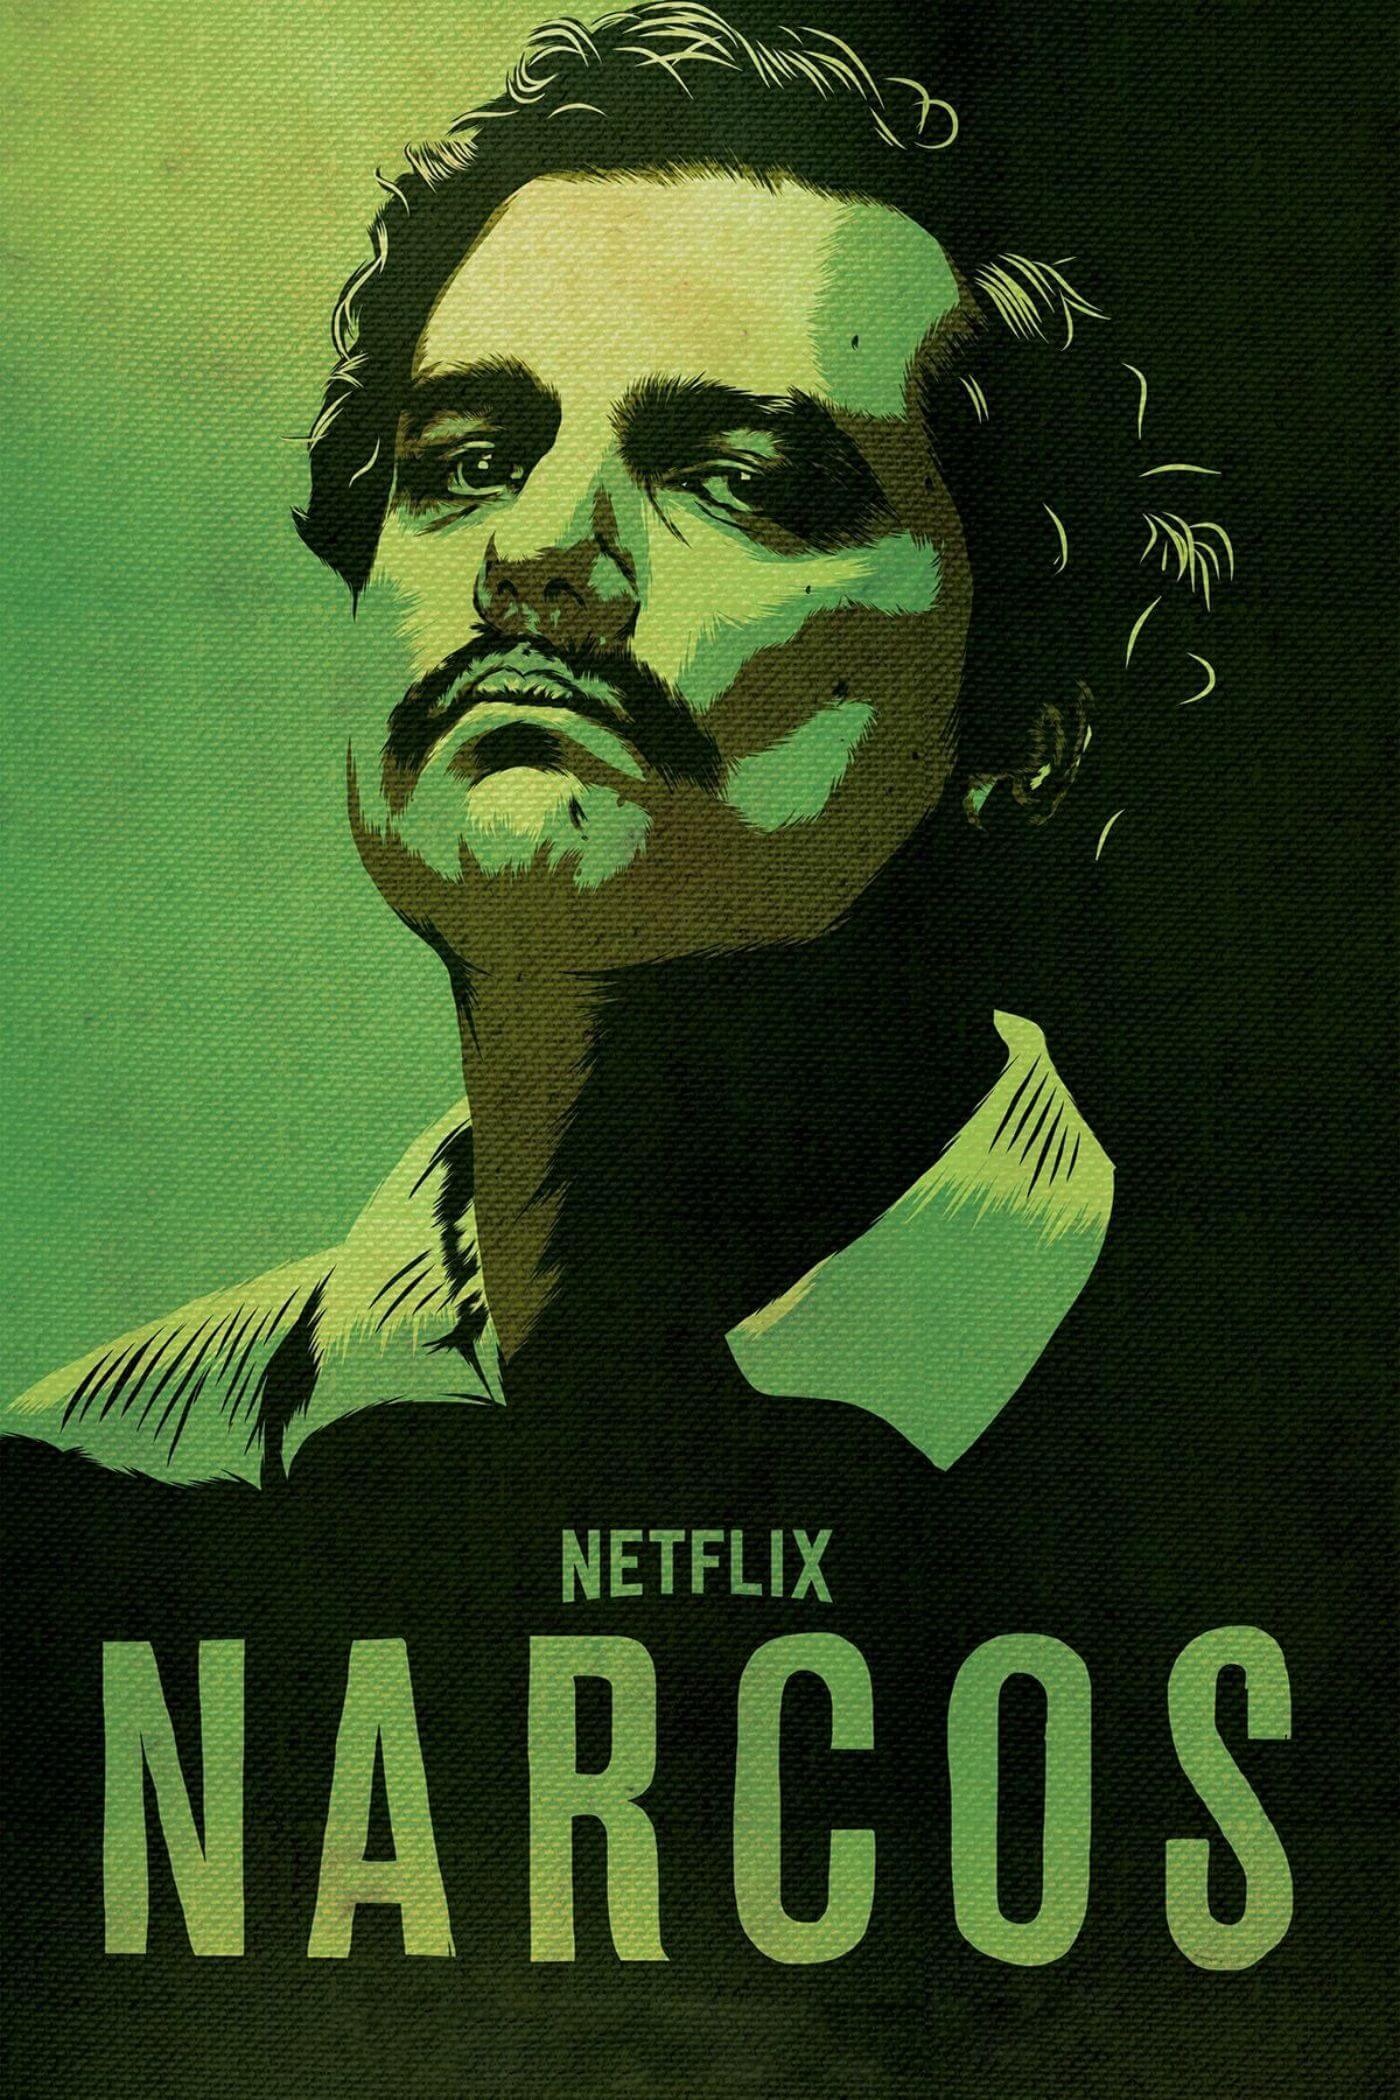 Narcos - Pablo Escobar - Netflix TV Show Poster Fan Art - Canvas Prints by Tallenge Store | Buy Posters, Canvas & Digital Art Prints | Small, Compact, Medium and Large Variants